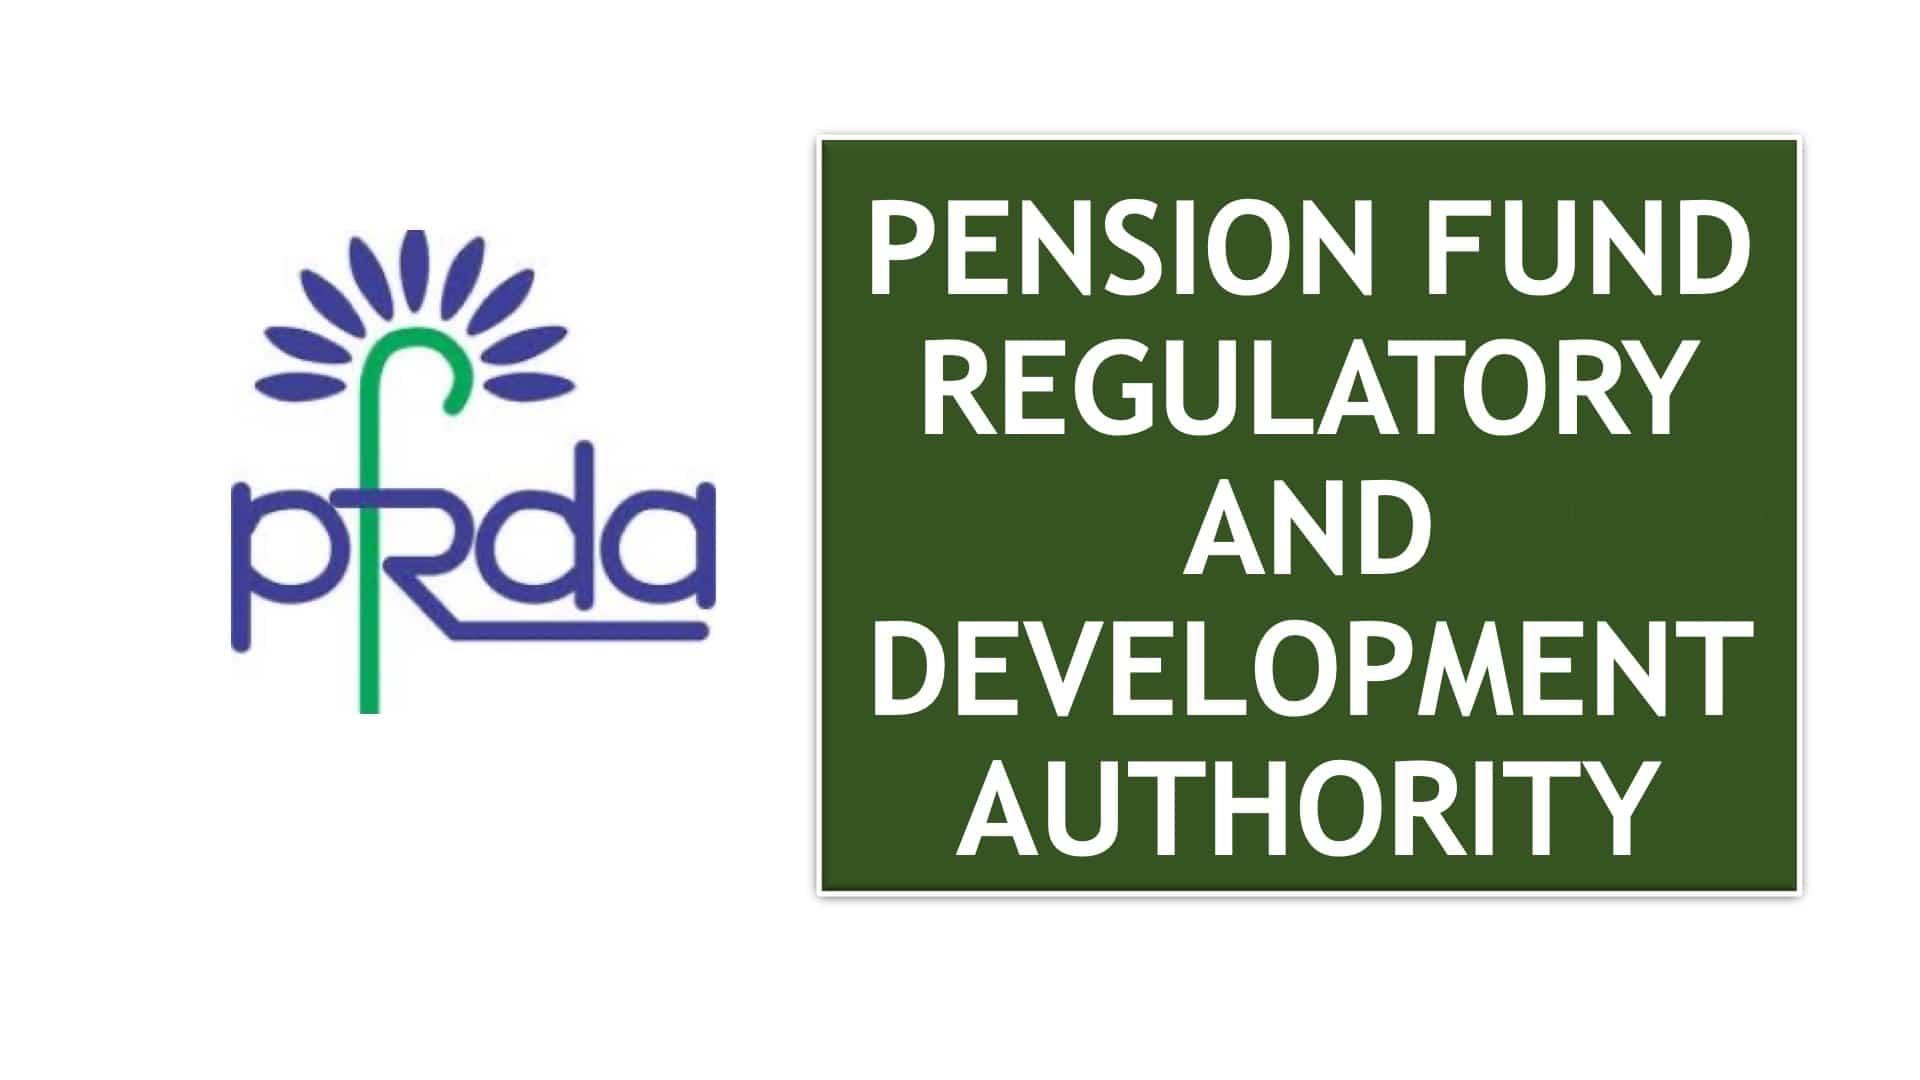 PFRDA Salary and Allowances payable to, and other Terms and Conditions of Services of Chairperson and Whole Time Members Amendment Rules, 2023 - Central Government Employees News